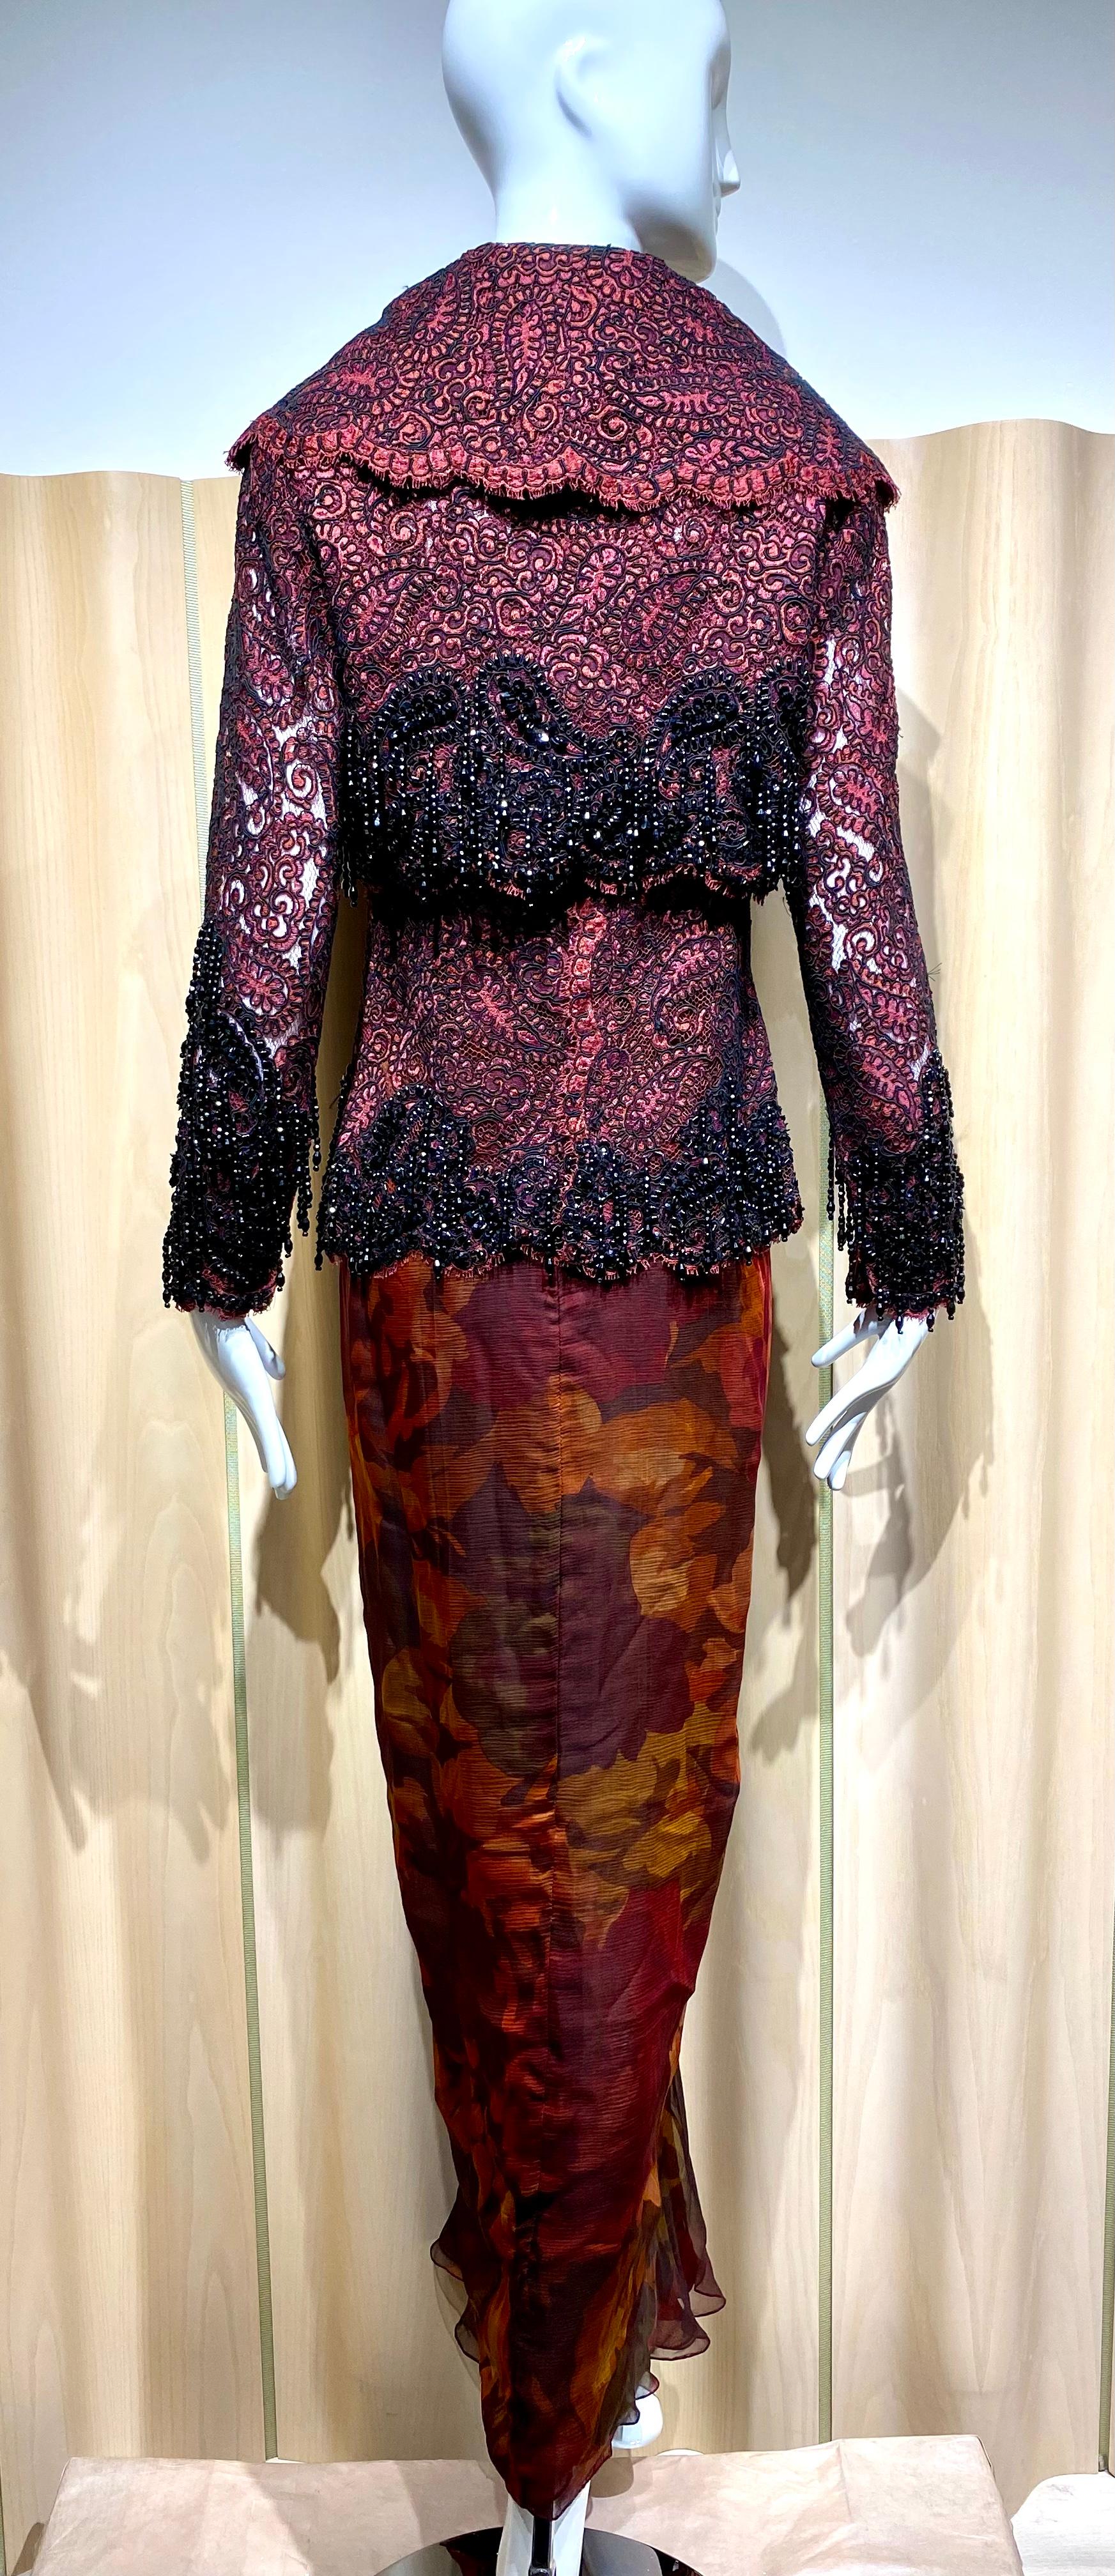 Beautiful 1990s Vintage James Galanos Couture reddish purple lace crop jacket embroidered with black beads.
This there piece comes with spaghetti straps lace blouse and silk chiffon skirt
Size: Small 
Jacket Bust: 34”
Skirt Waist: 25”